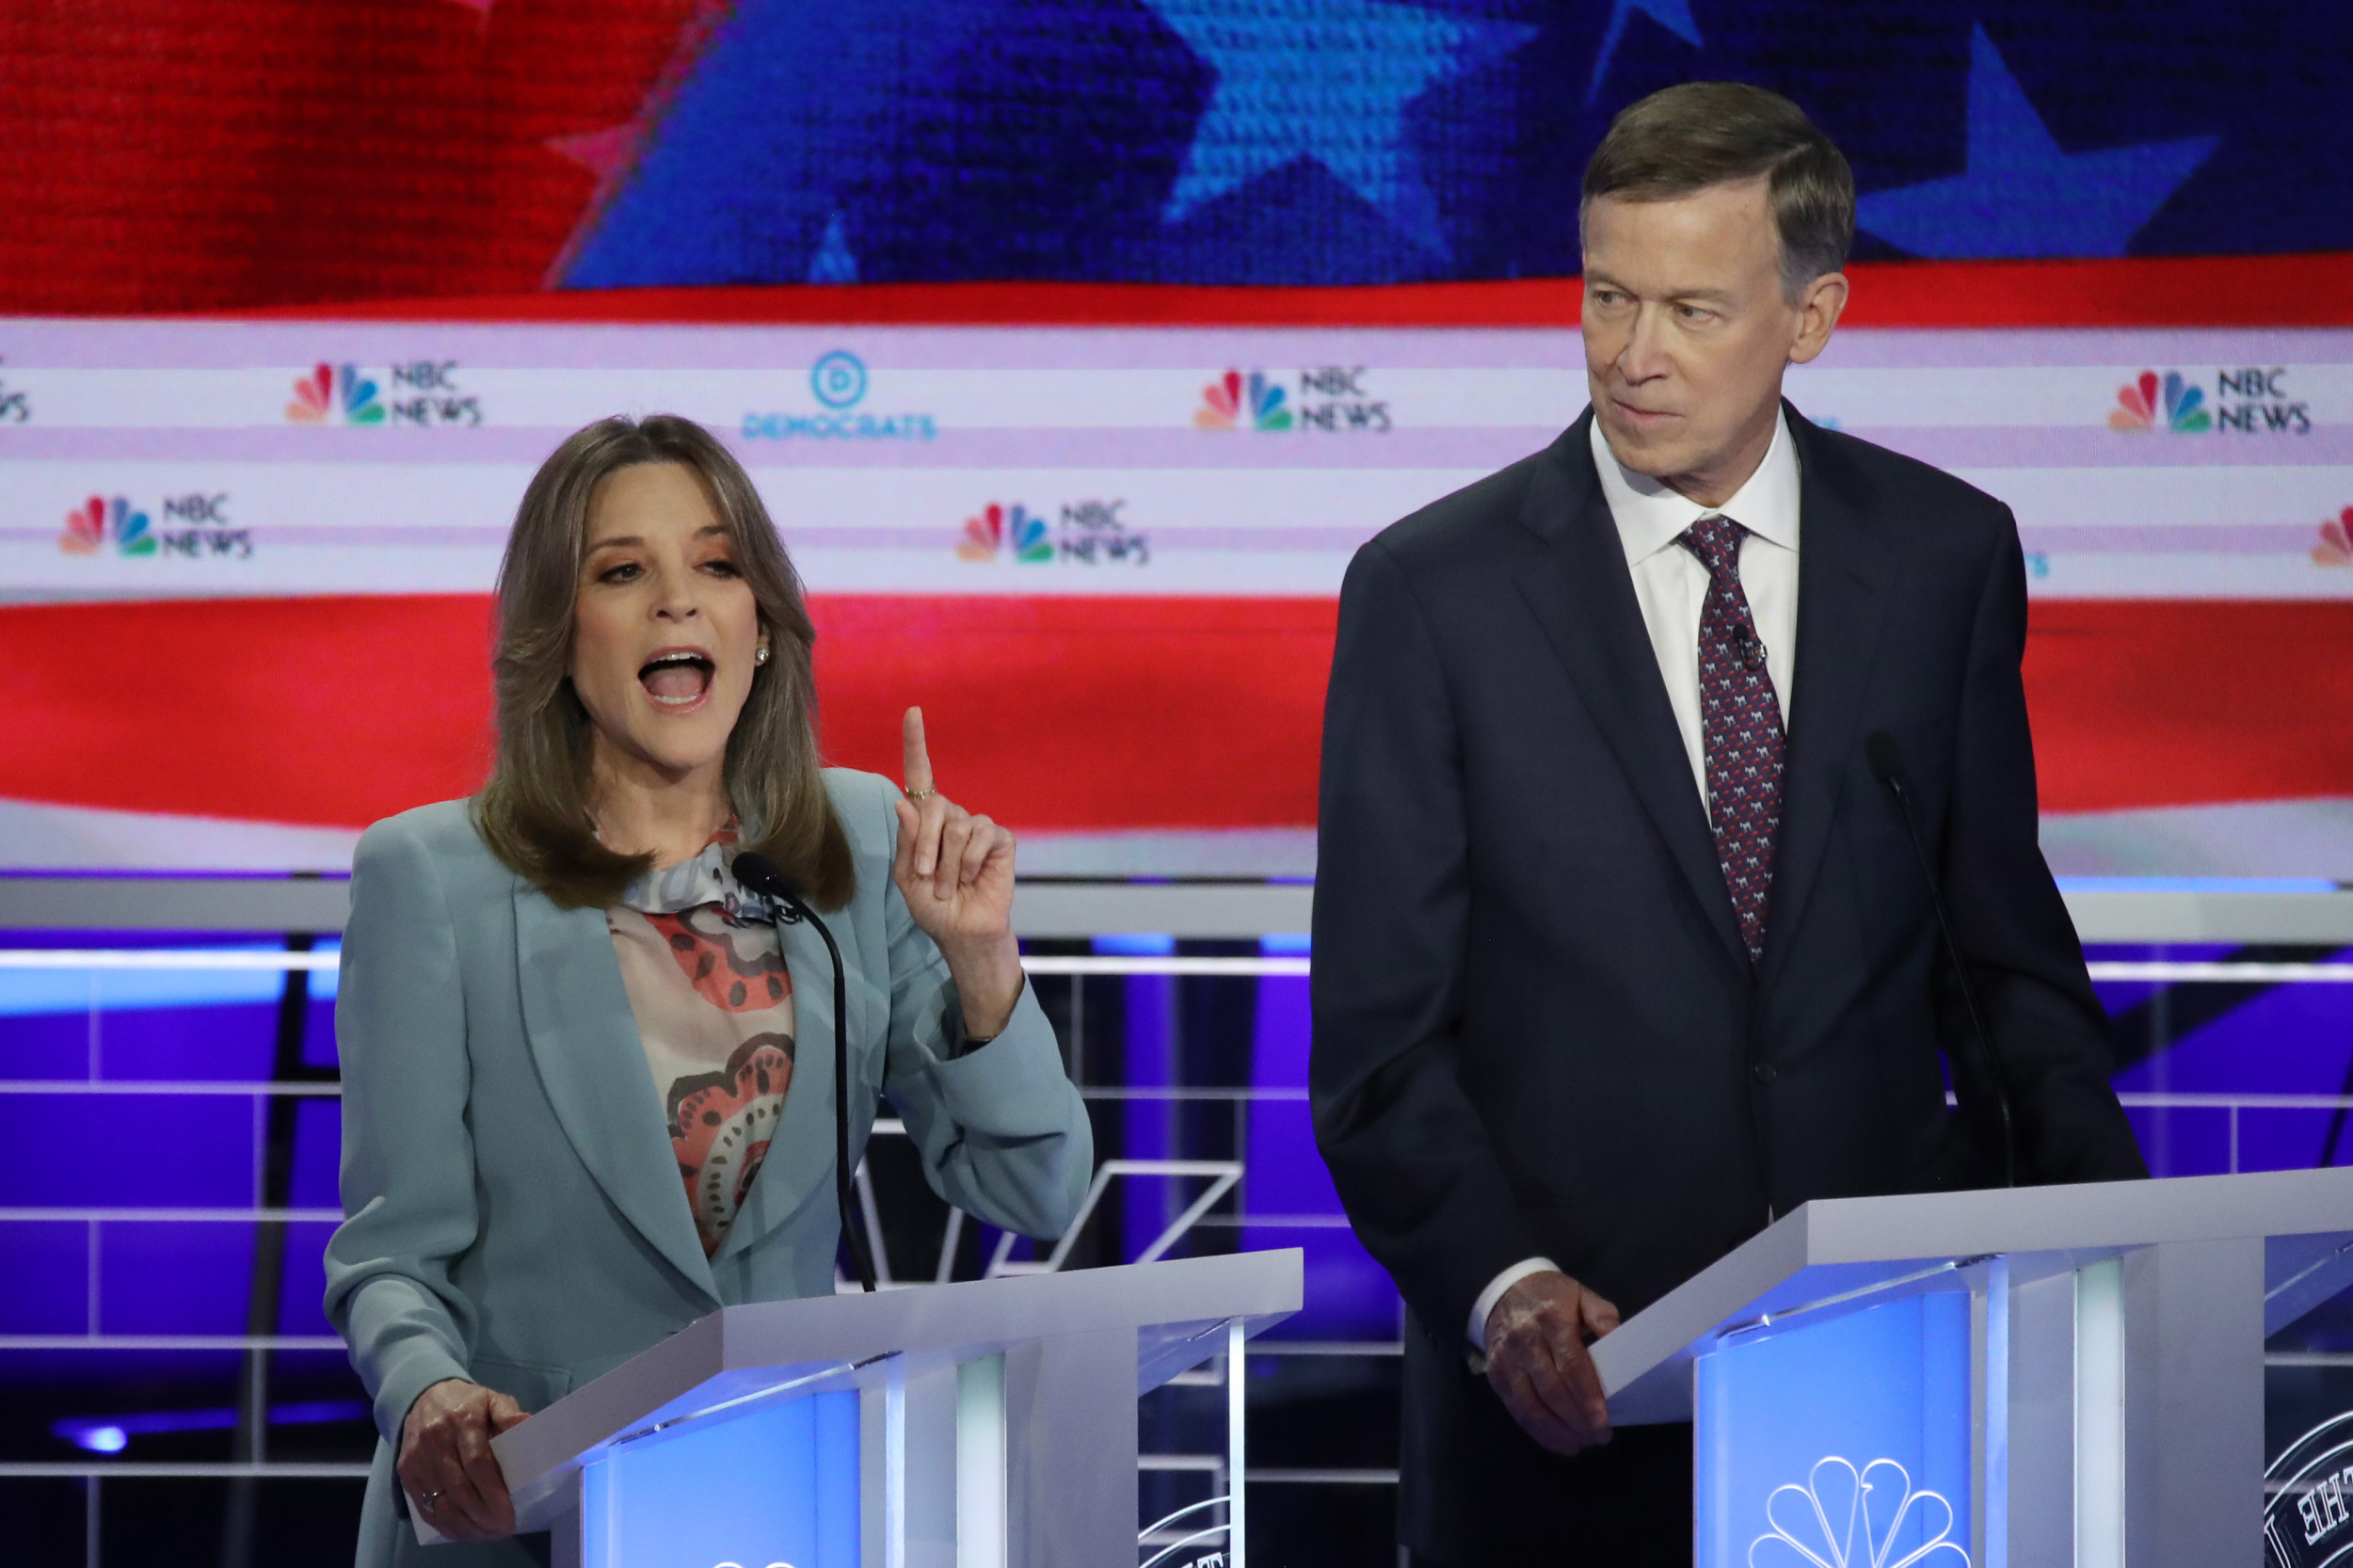 marianne-williamson-says-she-ll-harness-love-to-defeat-donald-trump